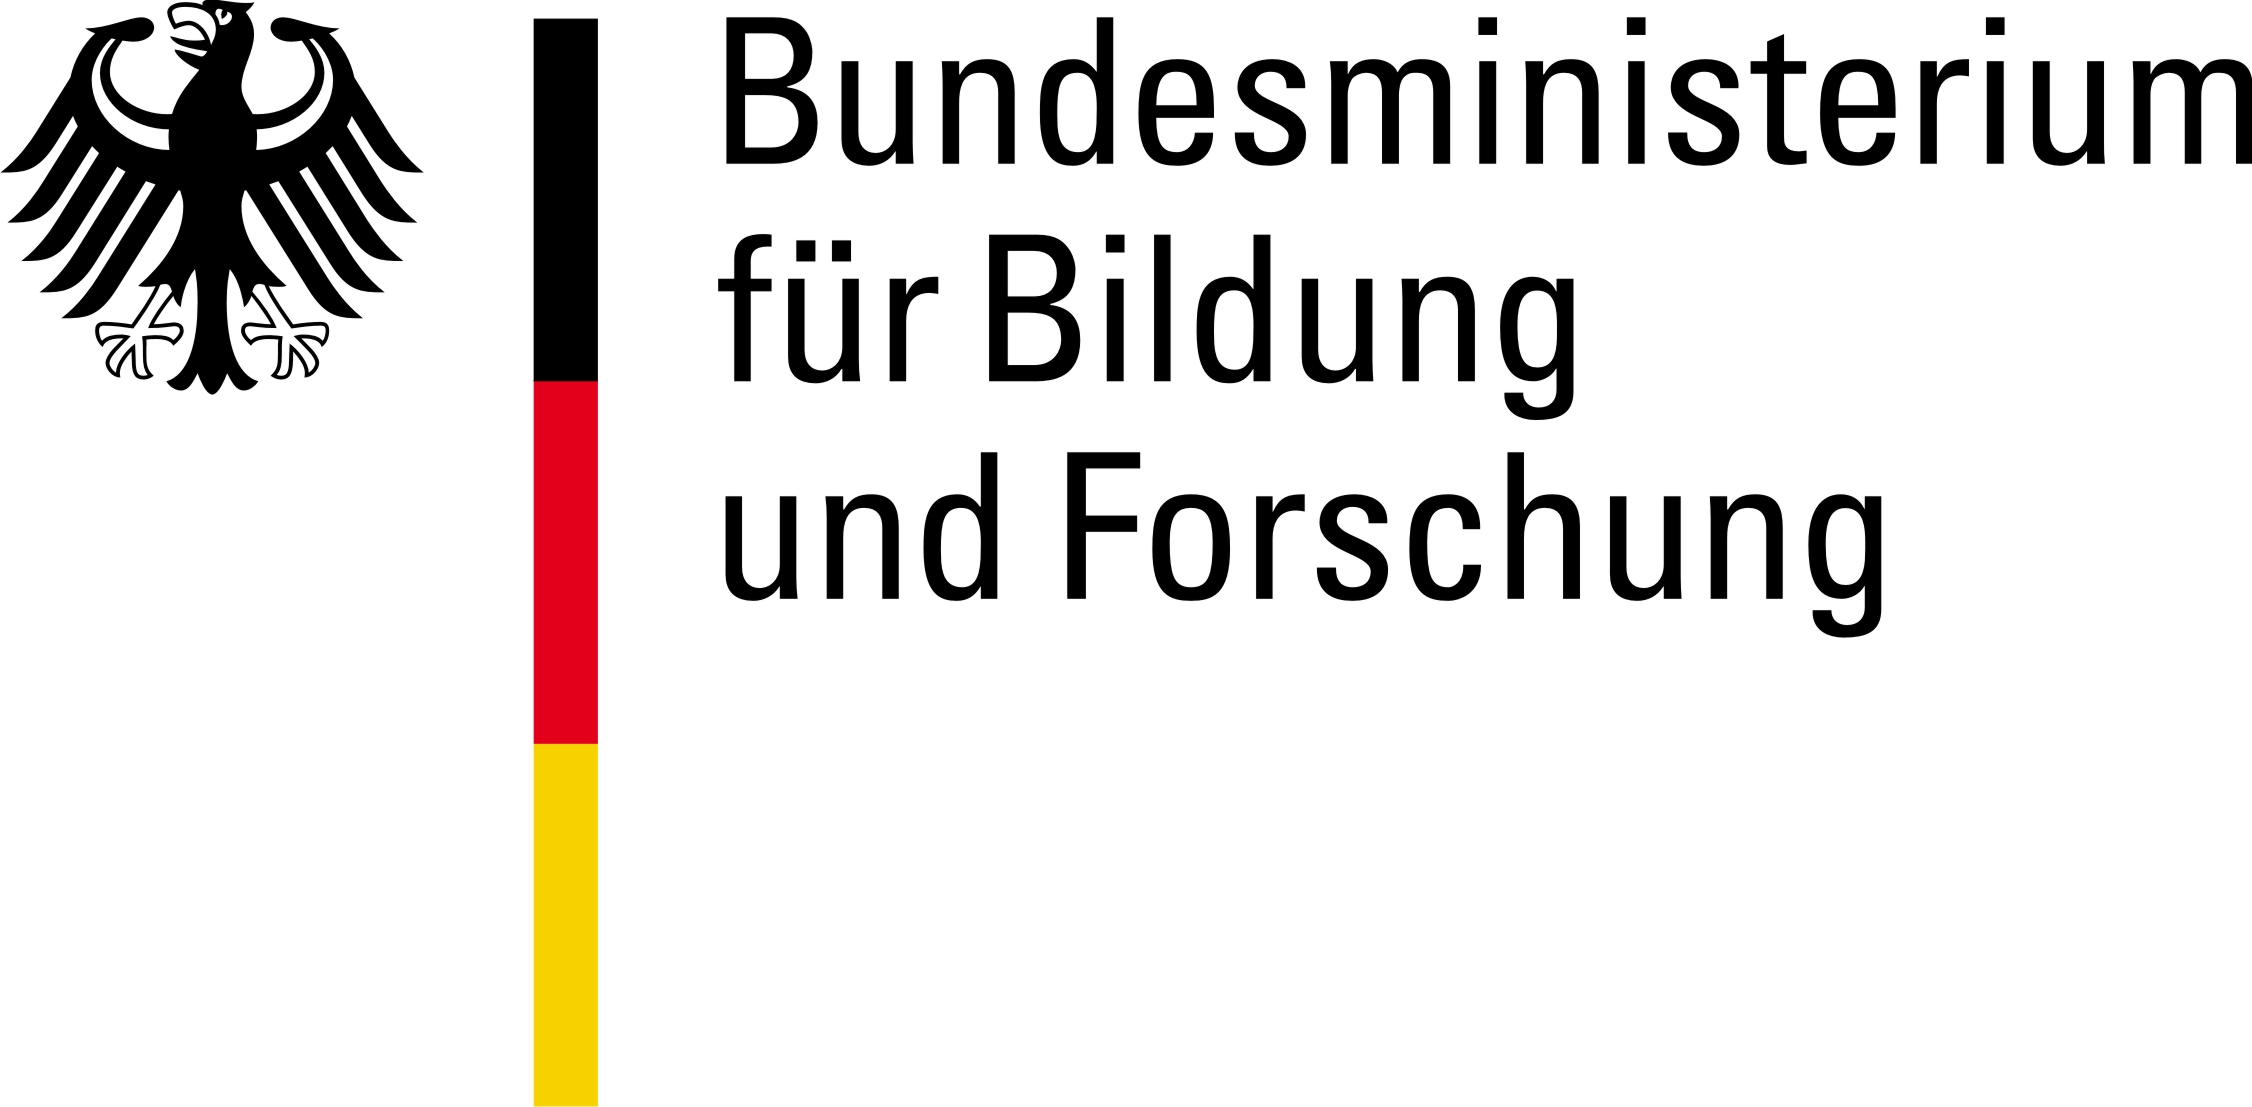  German Federal Ministry of Education and Research 